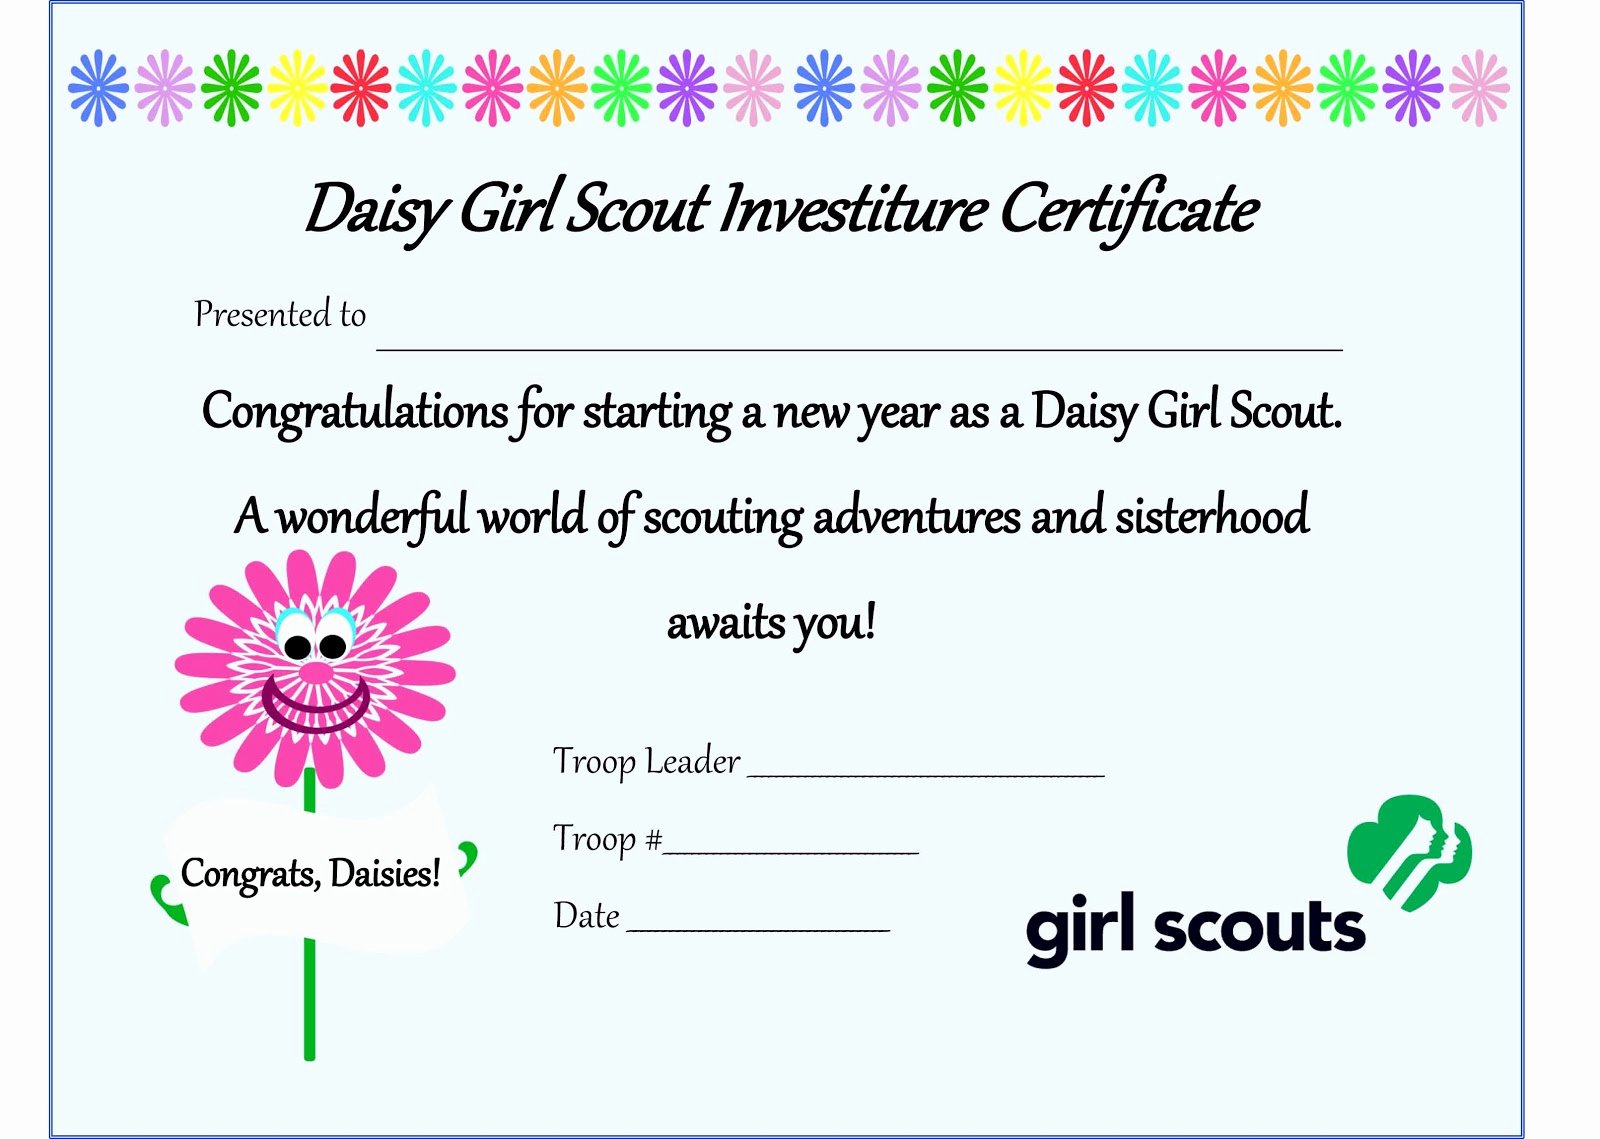 Girl Scout Bridging Certificate Elegant Girl Scouts 101 Investiture and Rededication